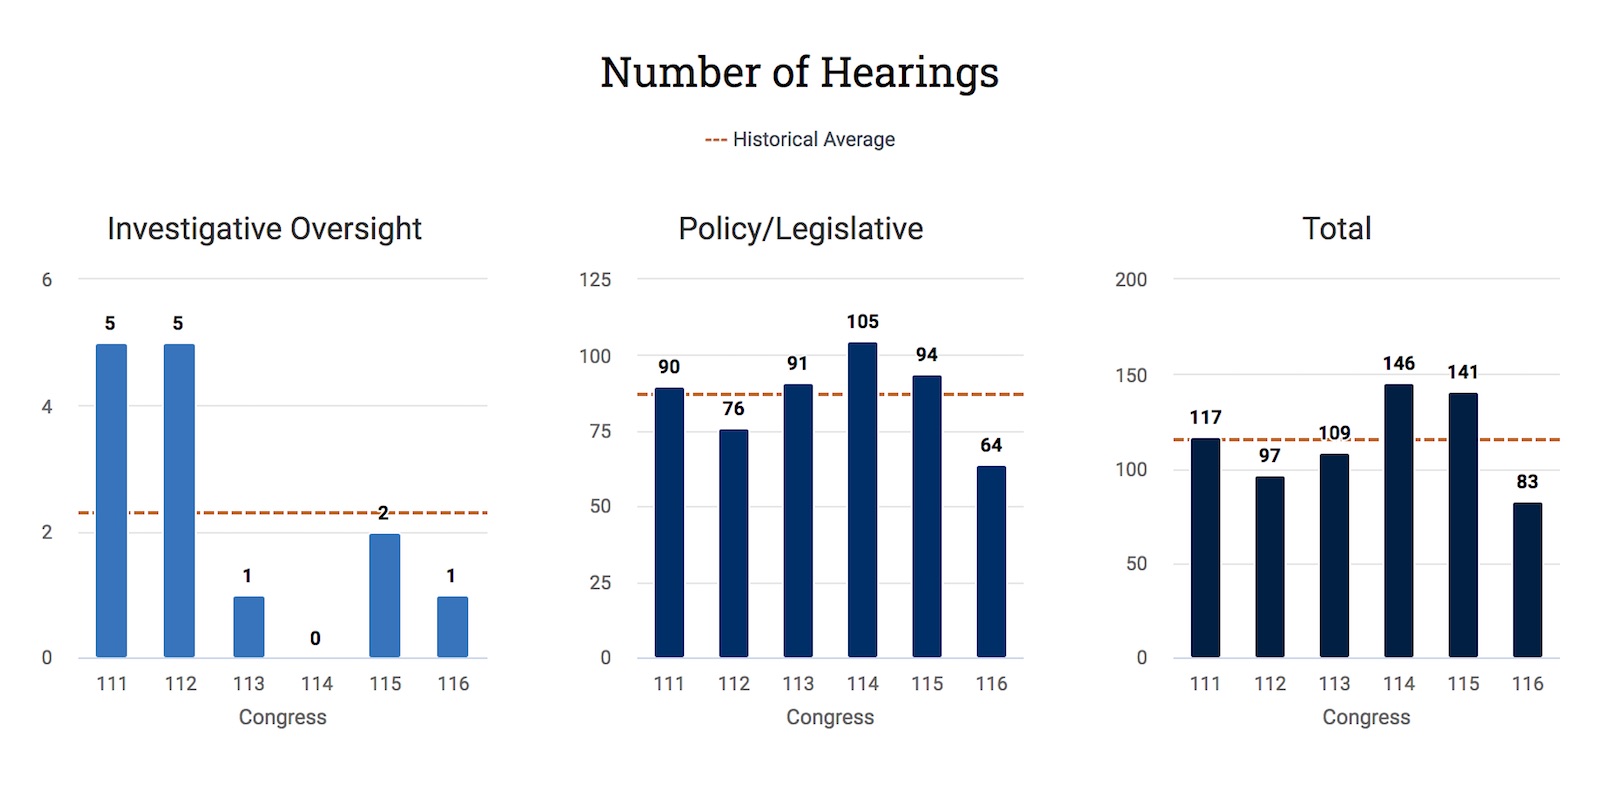 Charts displaying the number of hearings for a committee by category and compared to the historical average.